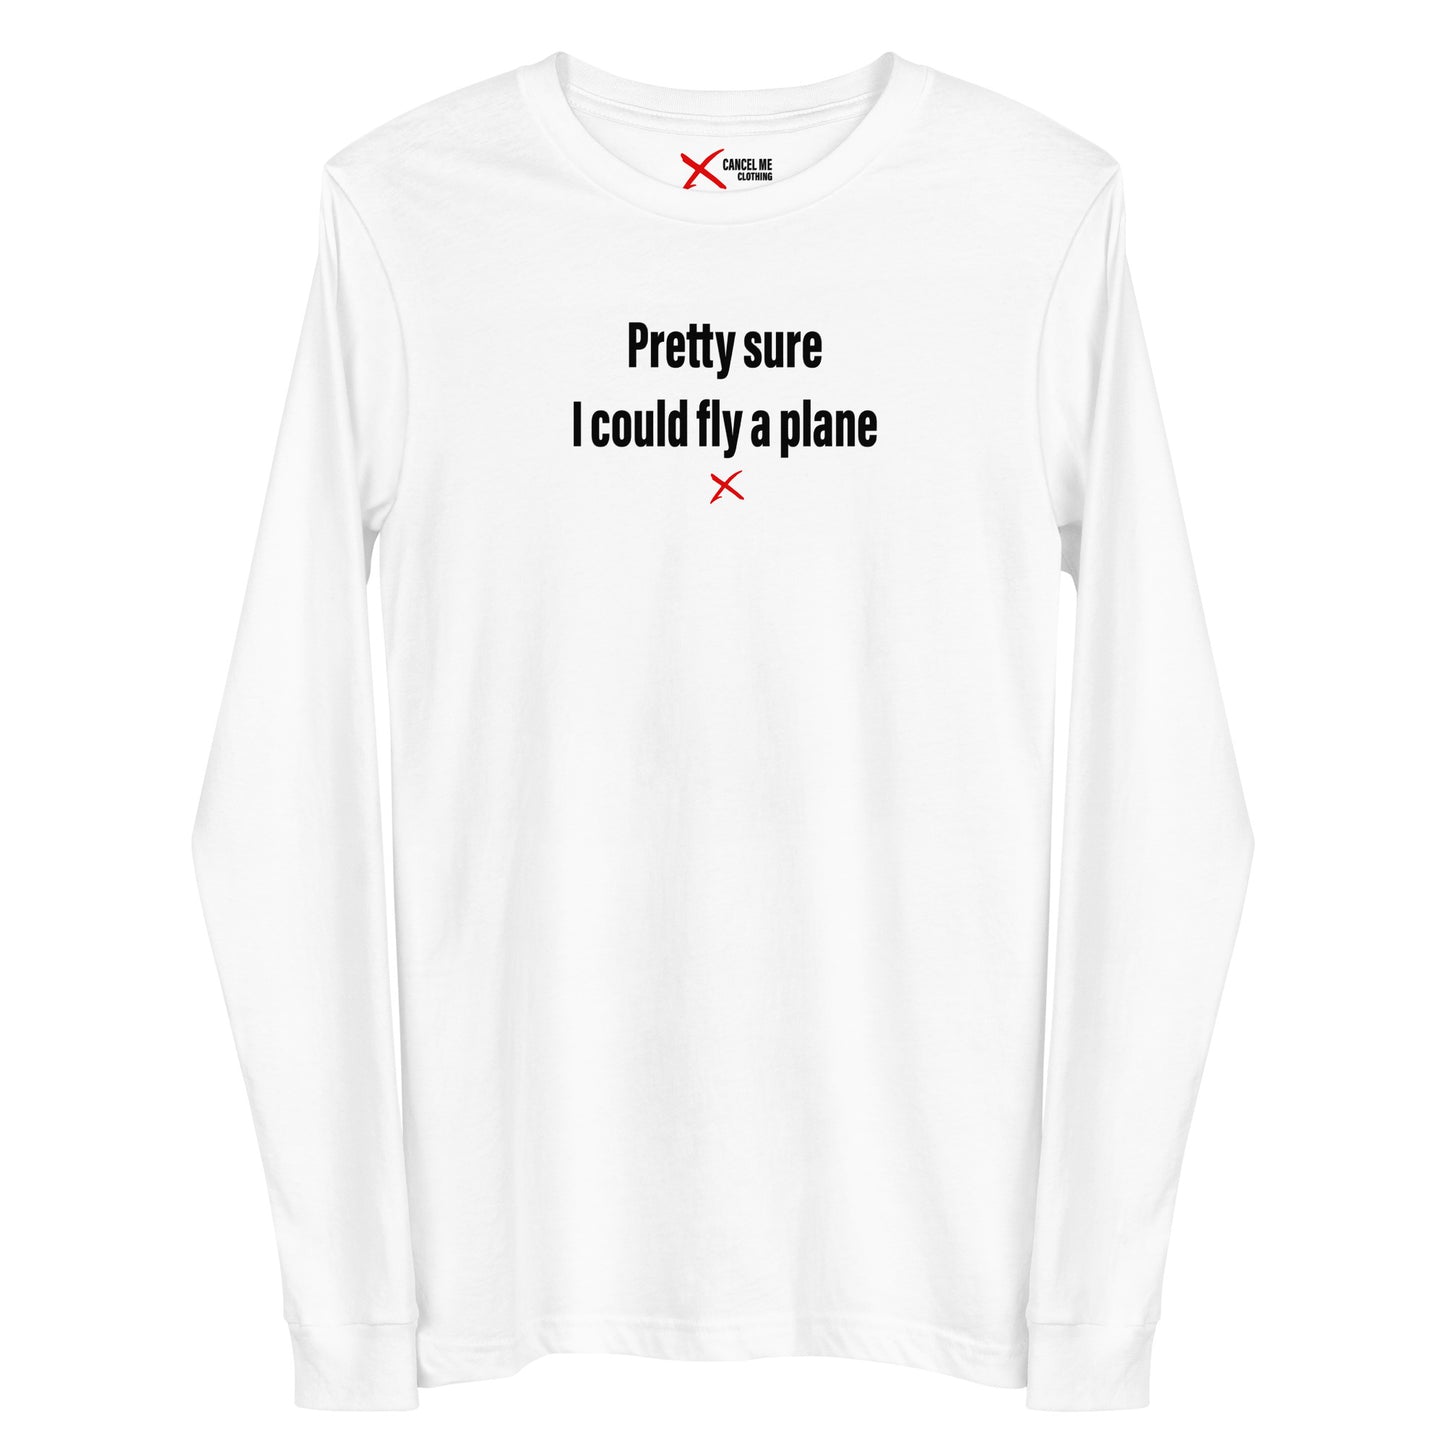 Pretty sure I could fly a plane - Longsleeve